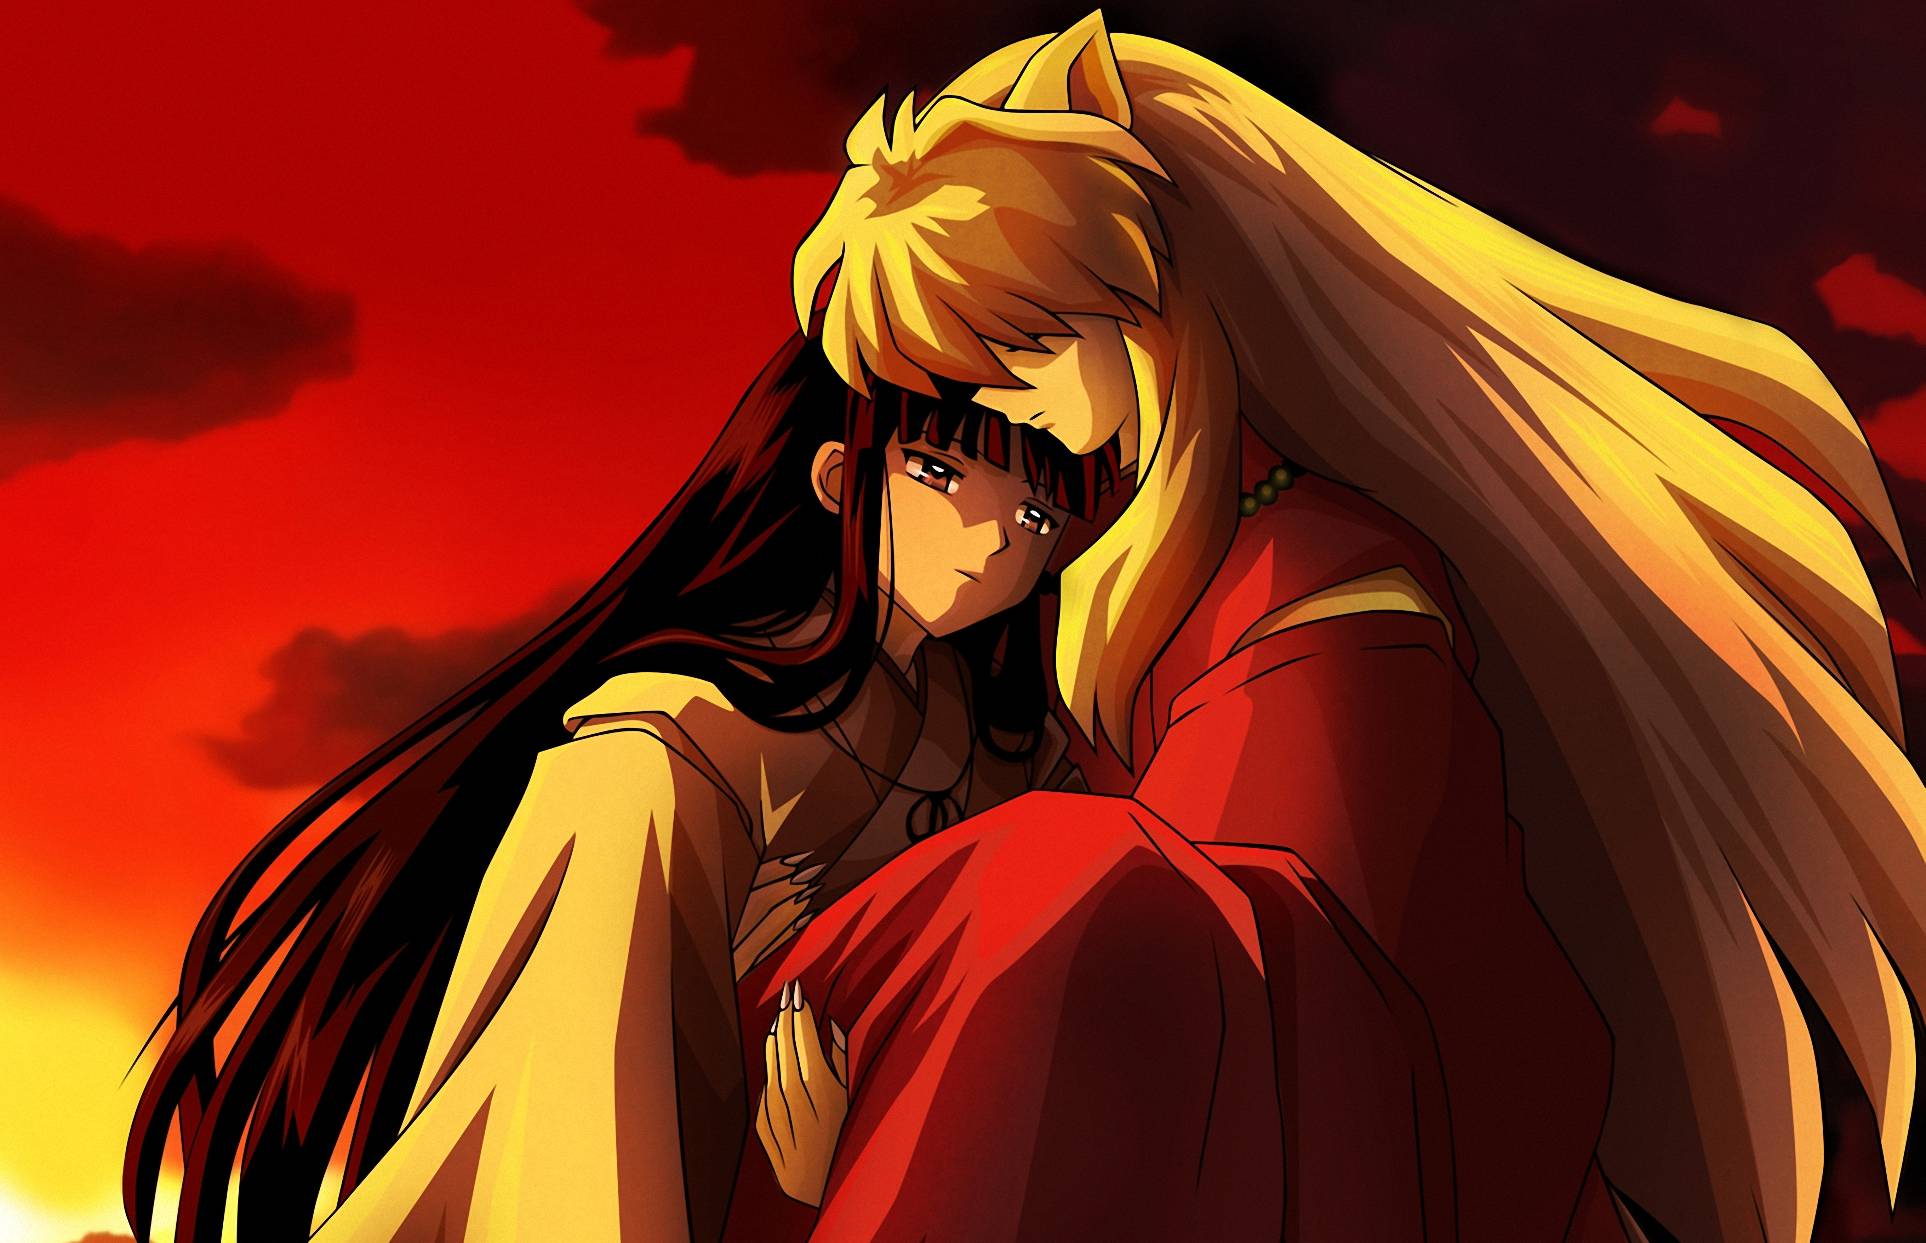 Awesome Inuyasha Wallpaper For IPhone Wallpaper. Wallpaper